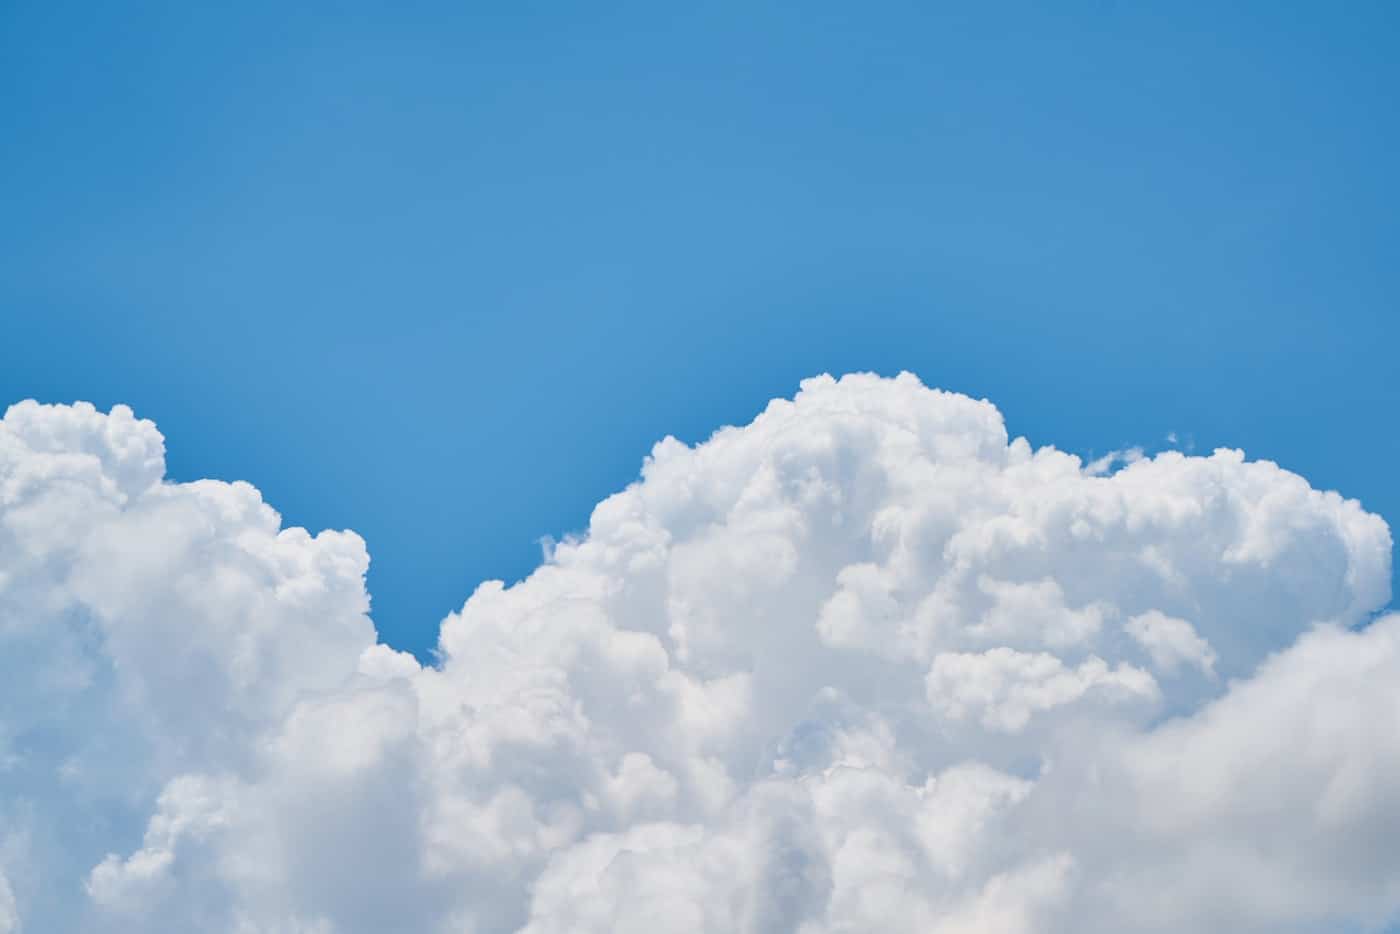 Image of clouds. Represents cloud security best practices.